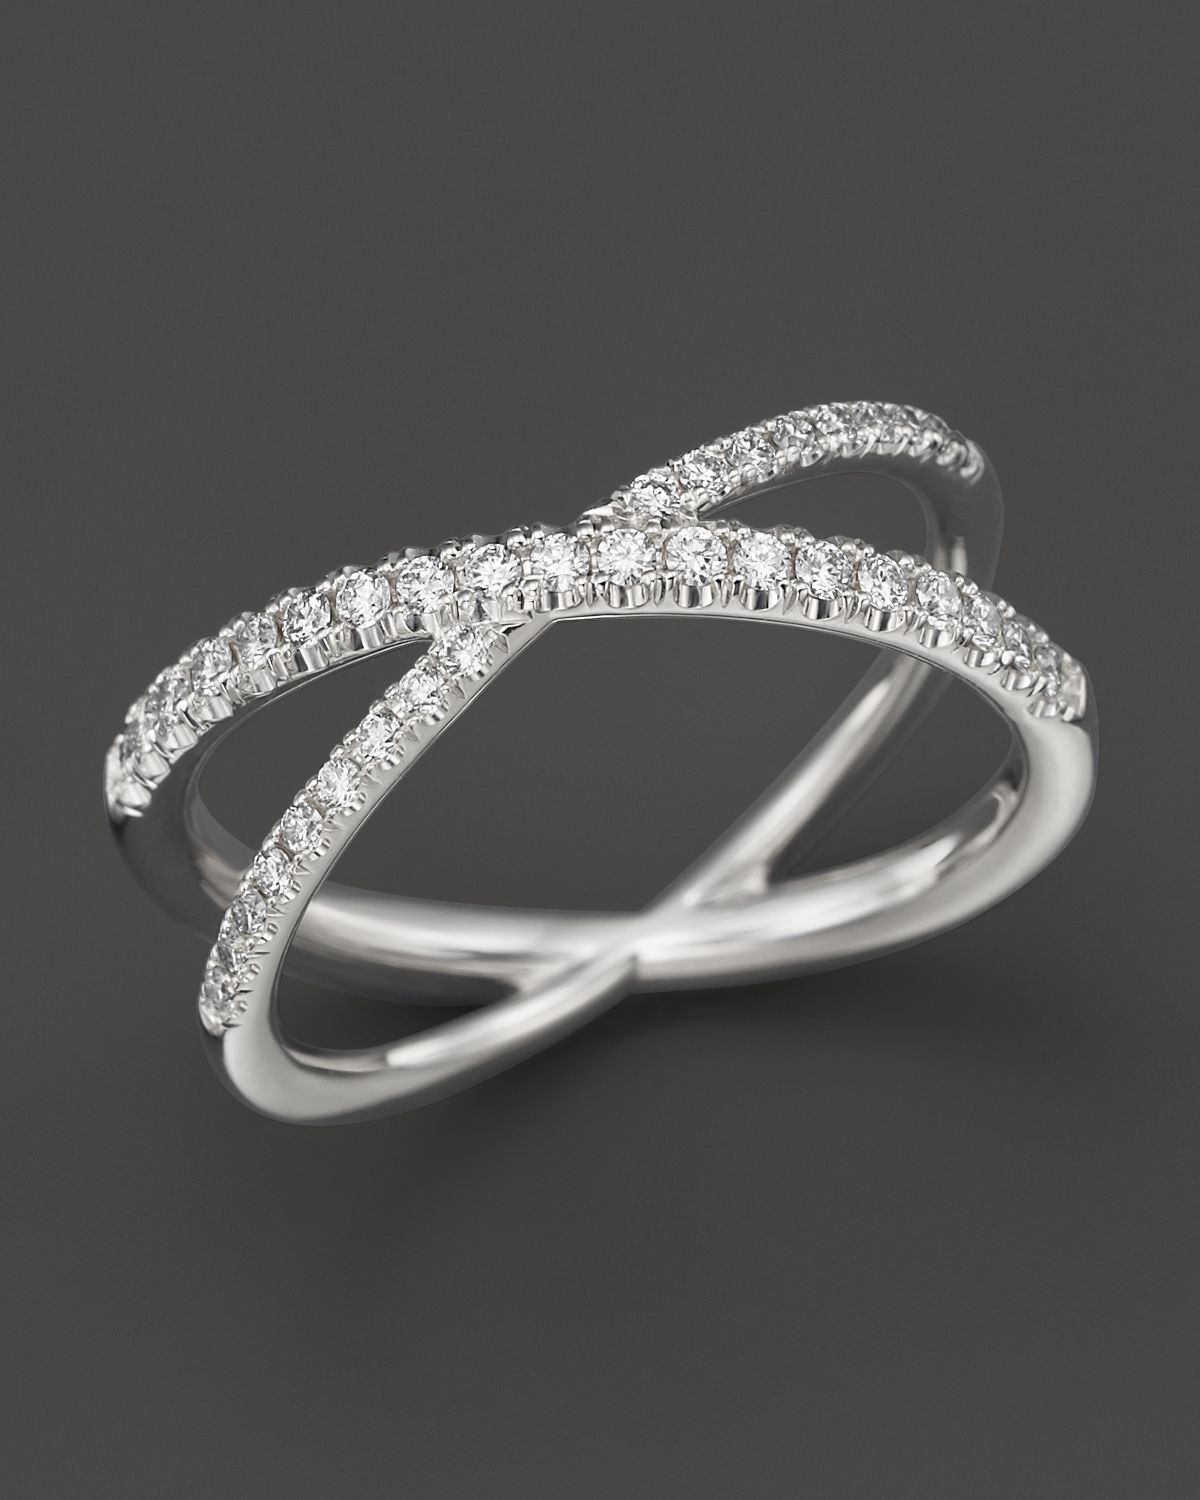 x crossover ring with diamonds